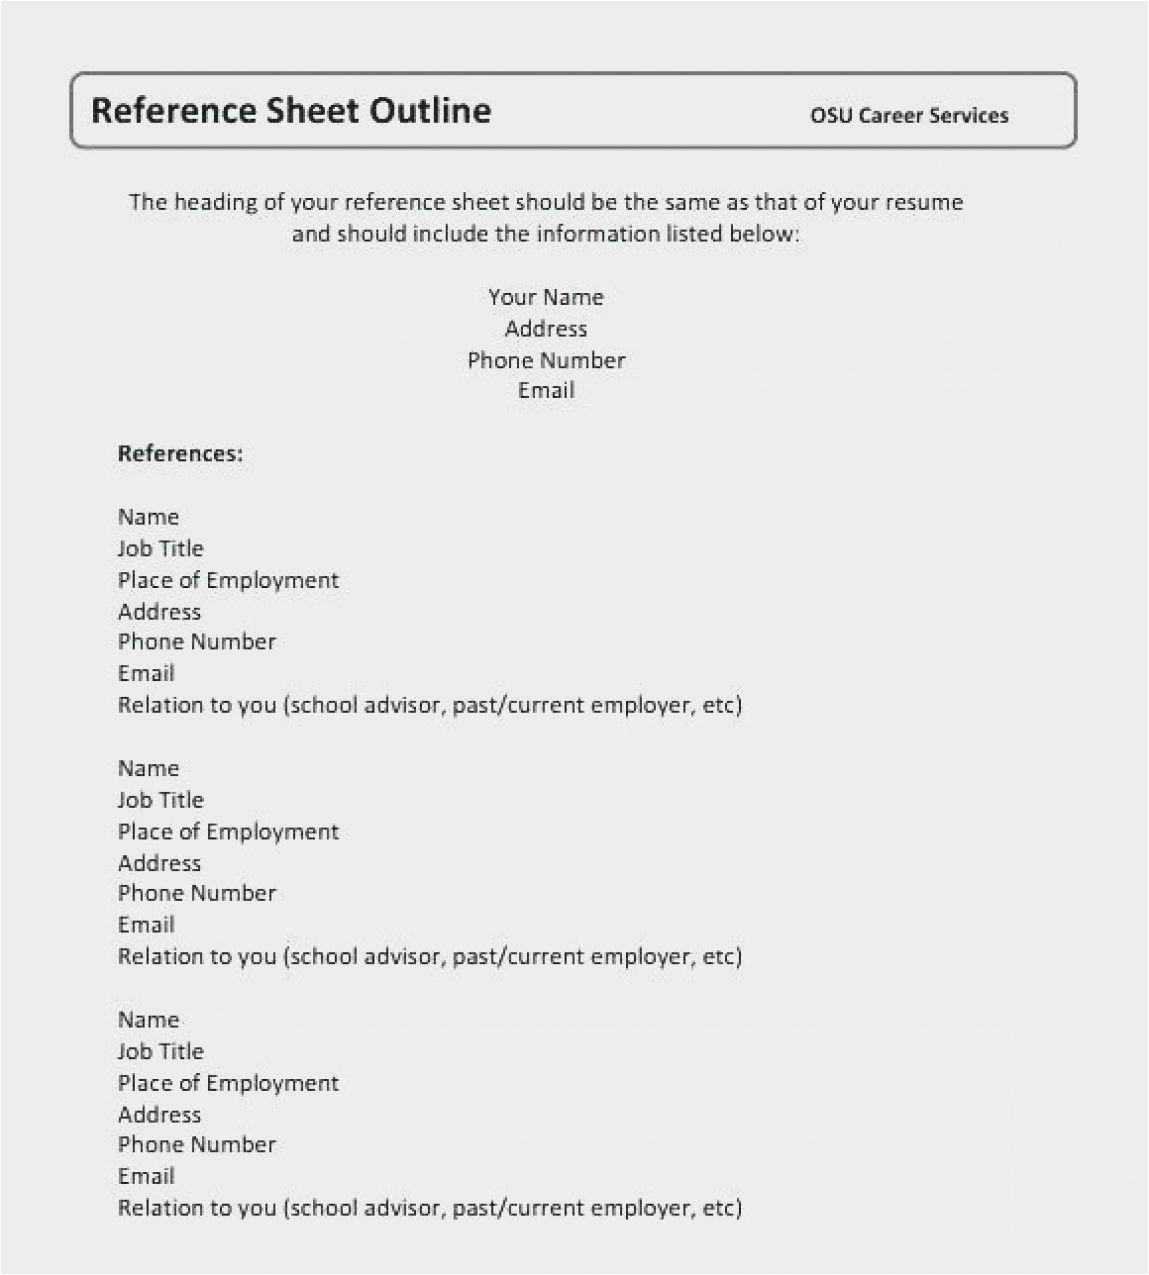 11 12 references outline for resume